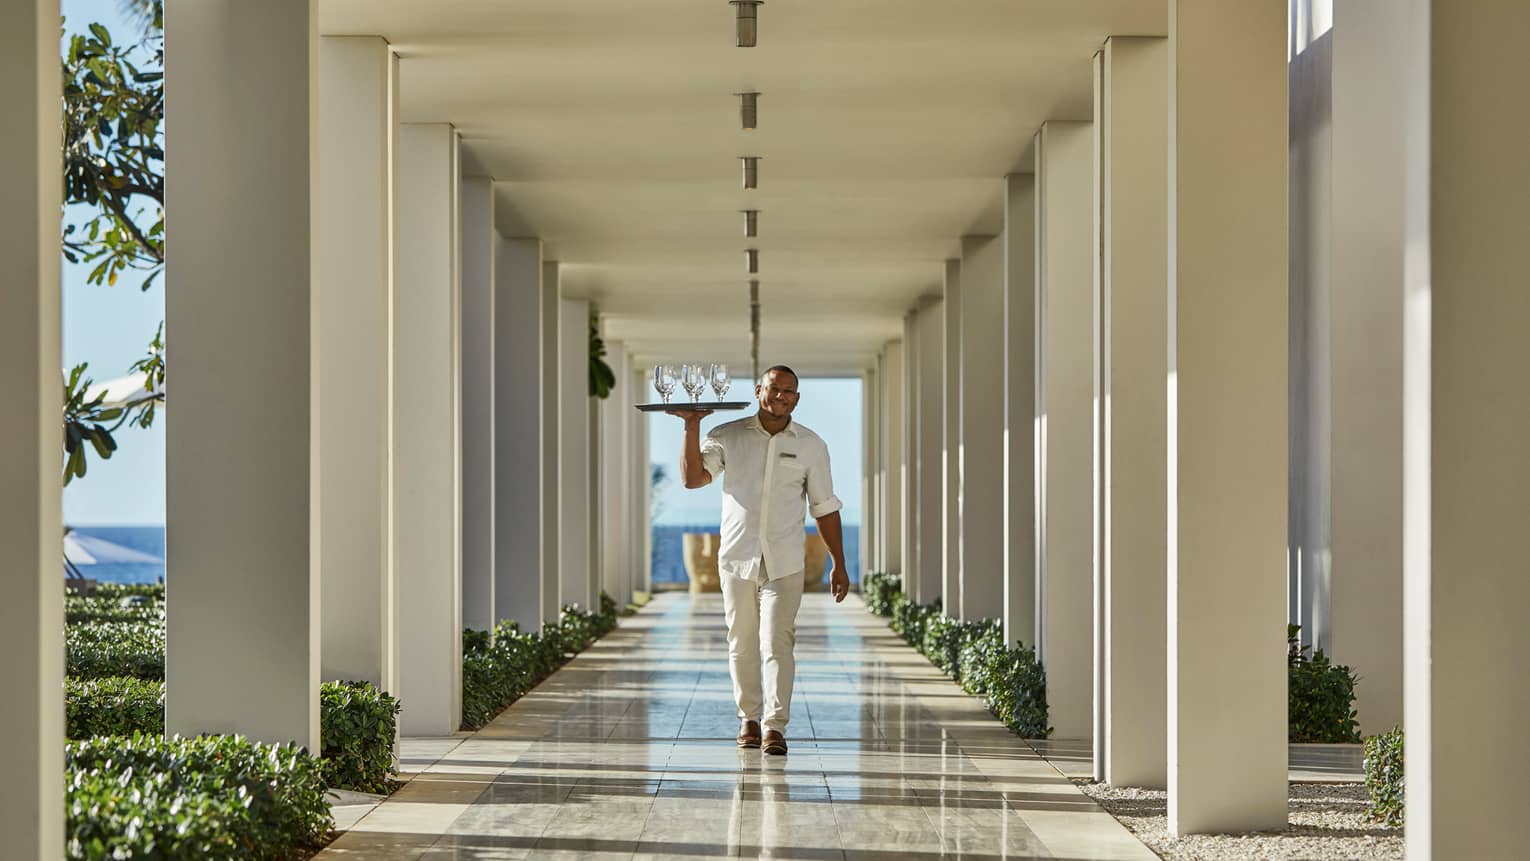 Server in white uniform carries tray of empty wine glasses through outdoor hallways with white posts, beams